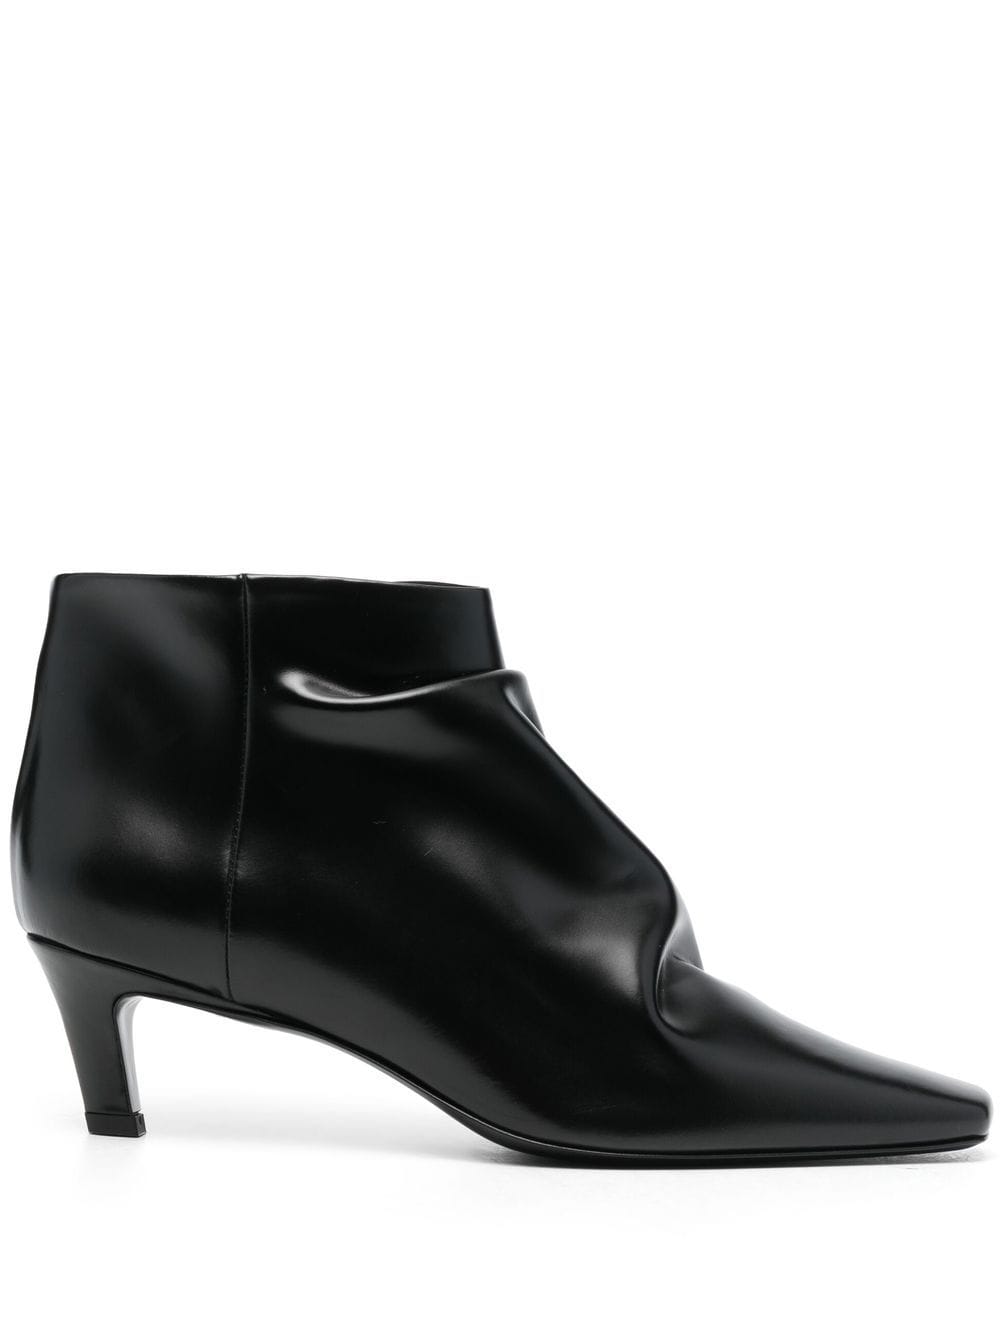 TOTEME 60mm leather ankle boots - Black von TOTEME